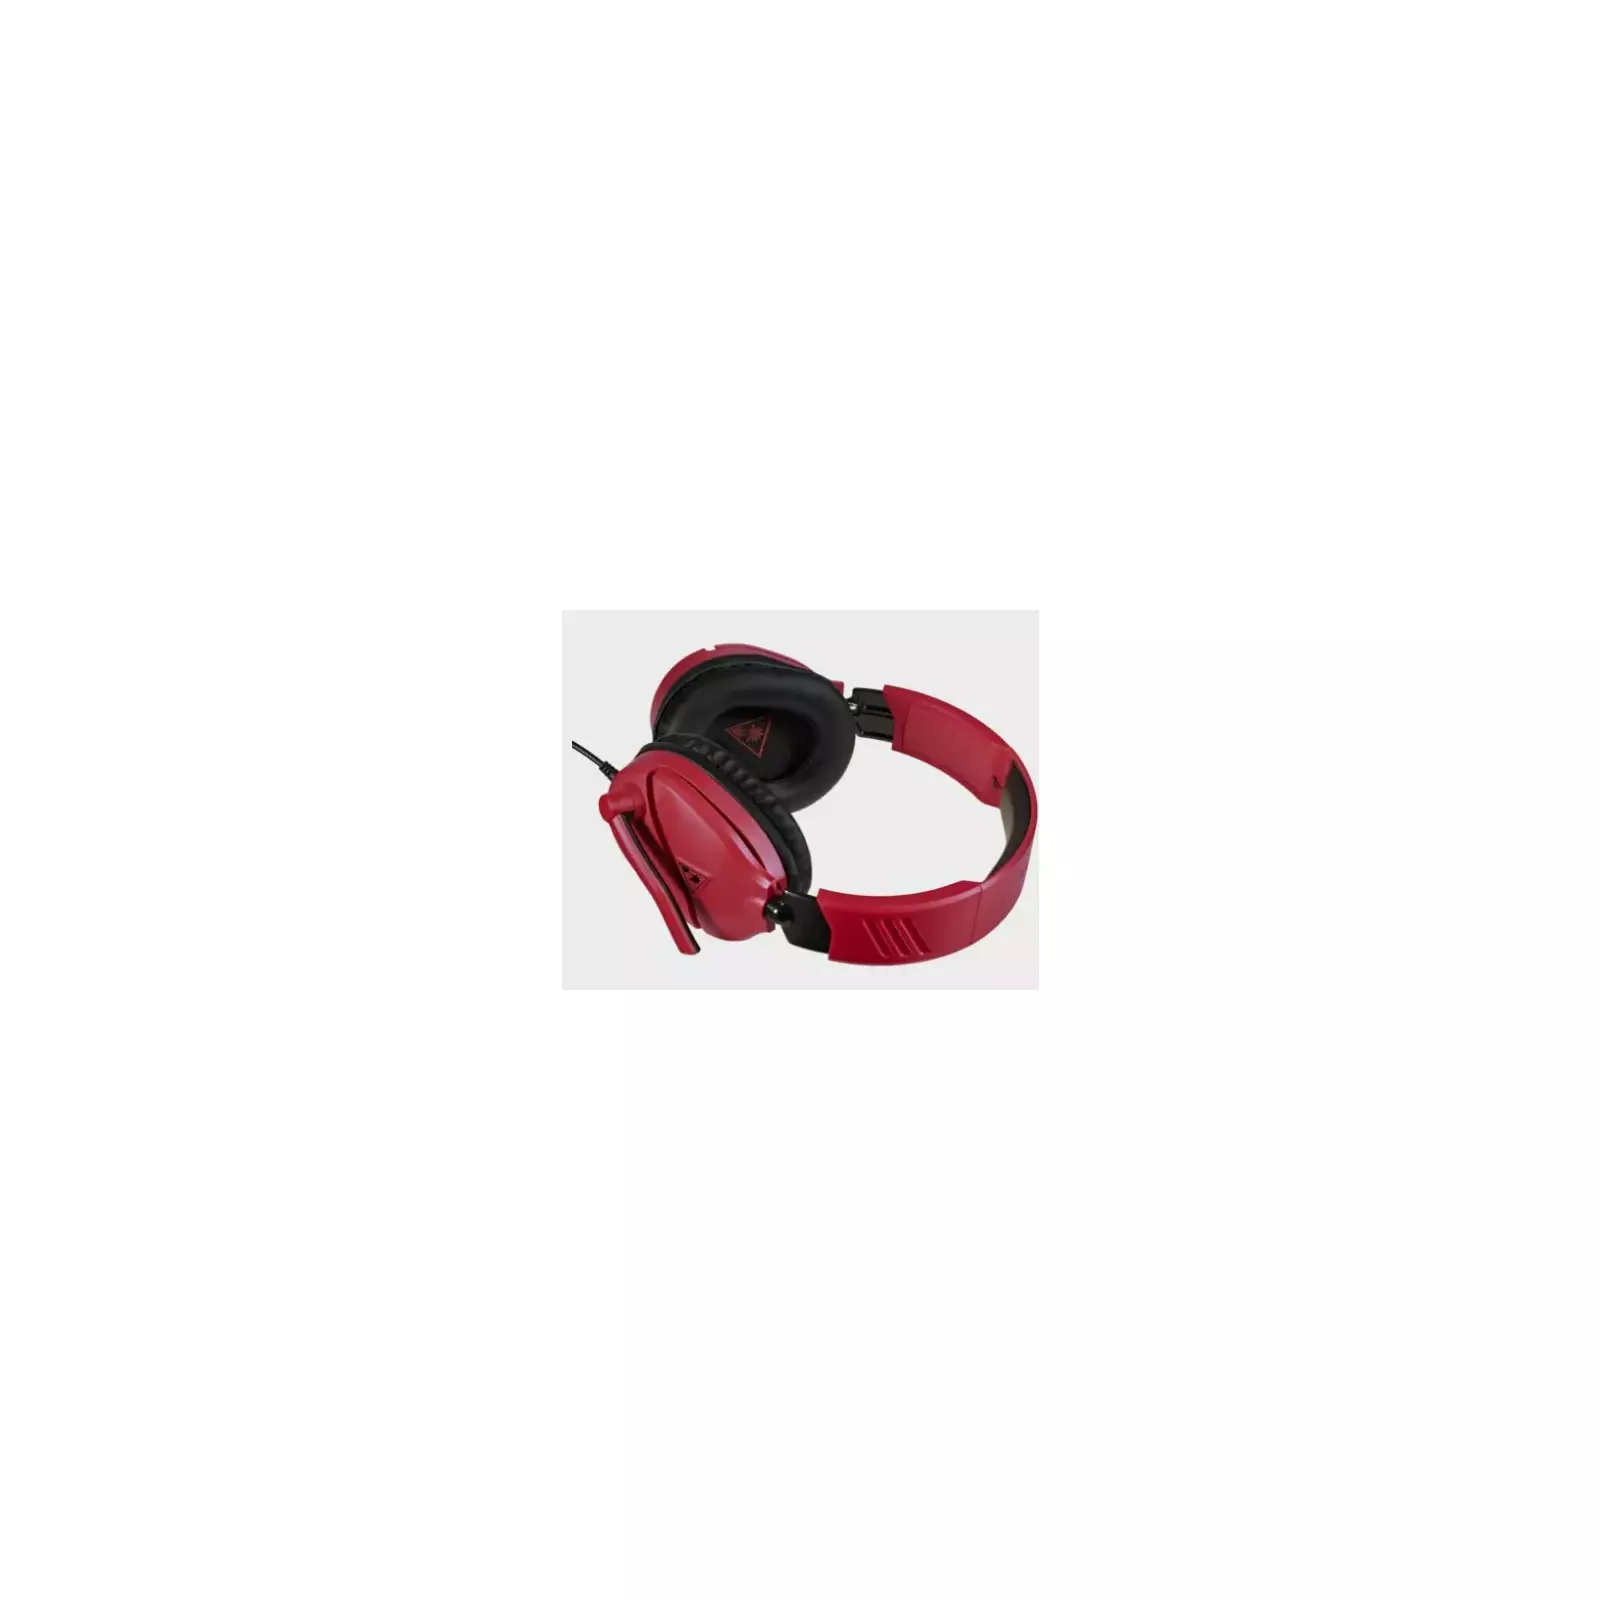 Casque Gamer Recon 70n Pour Nintendo Switch Compatible PS4, Xbox